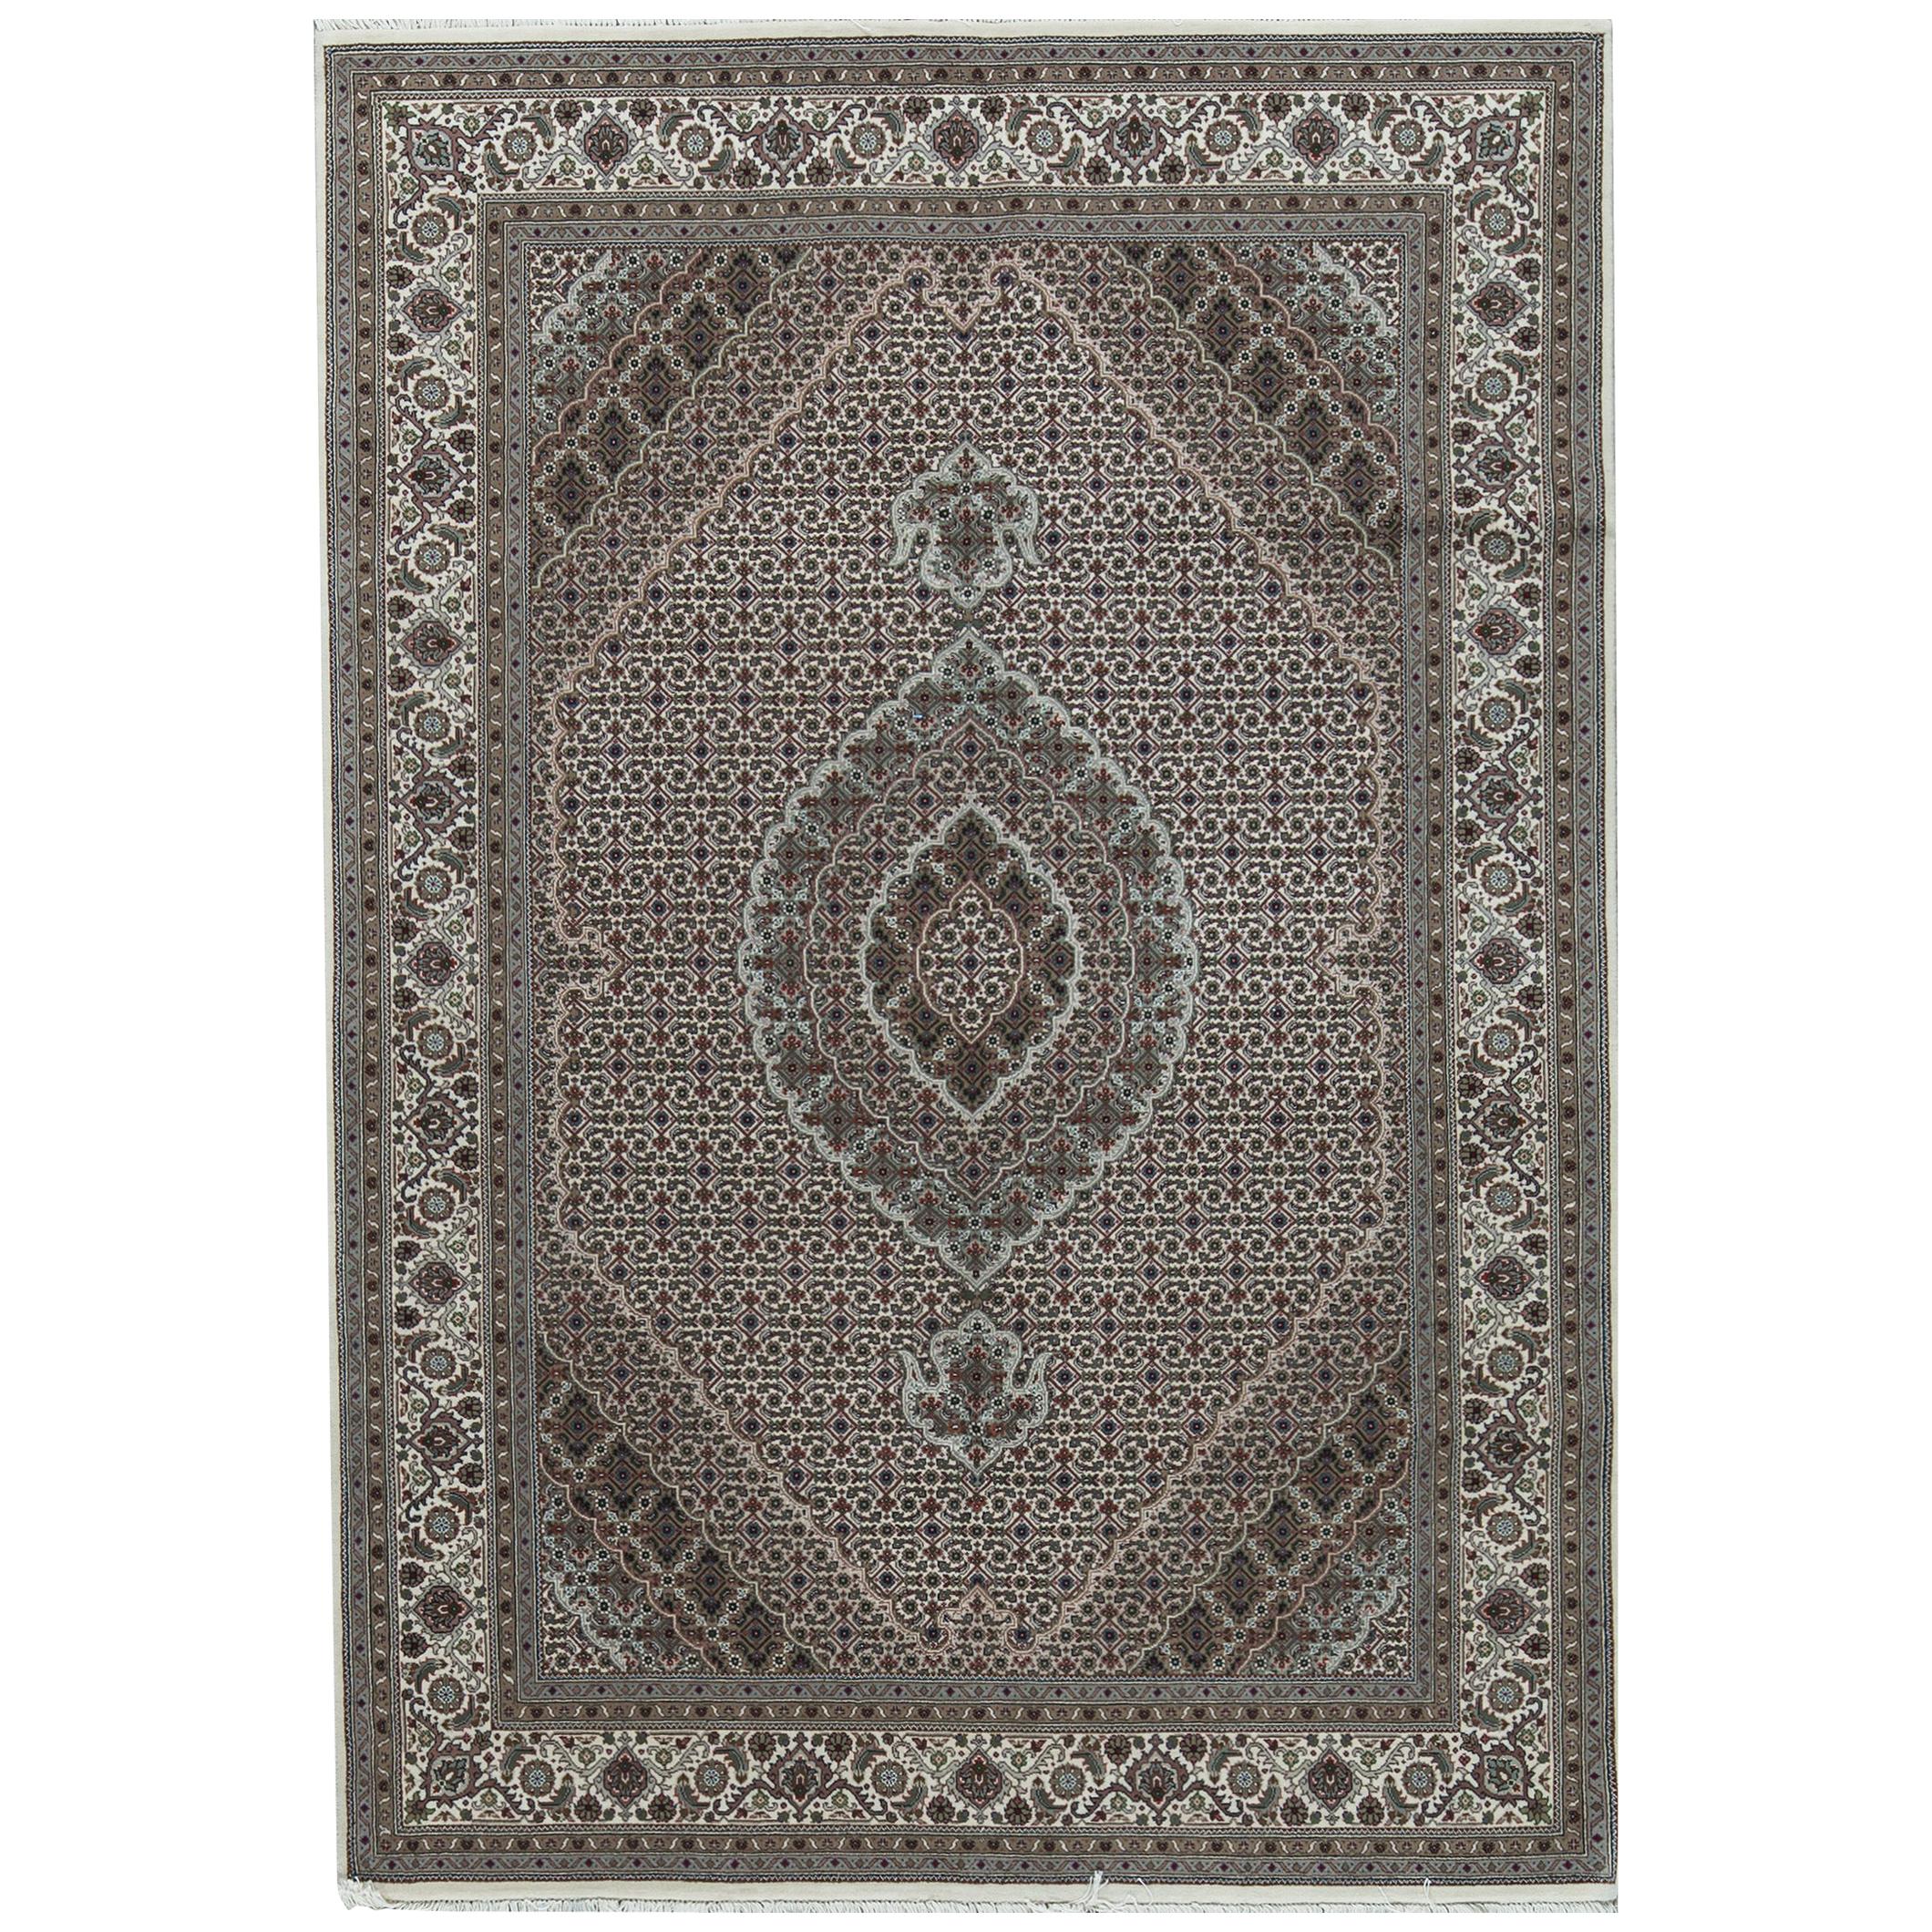 One of a Kind Traditional Hand Woven Wool Area Rug 5'7 x 8'